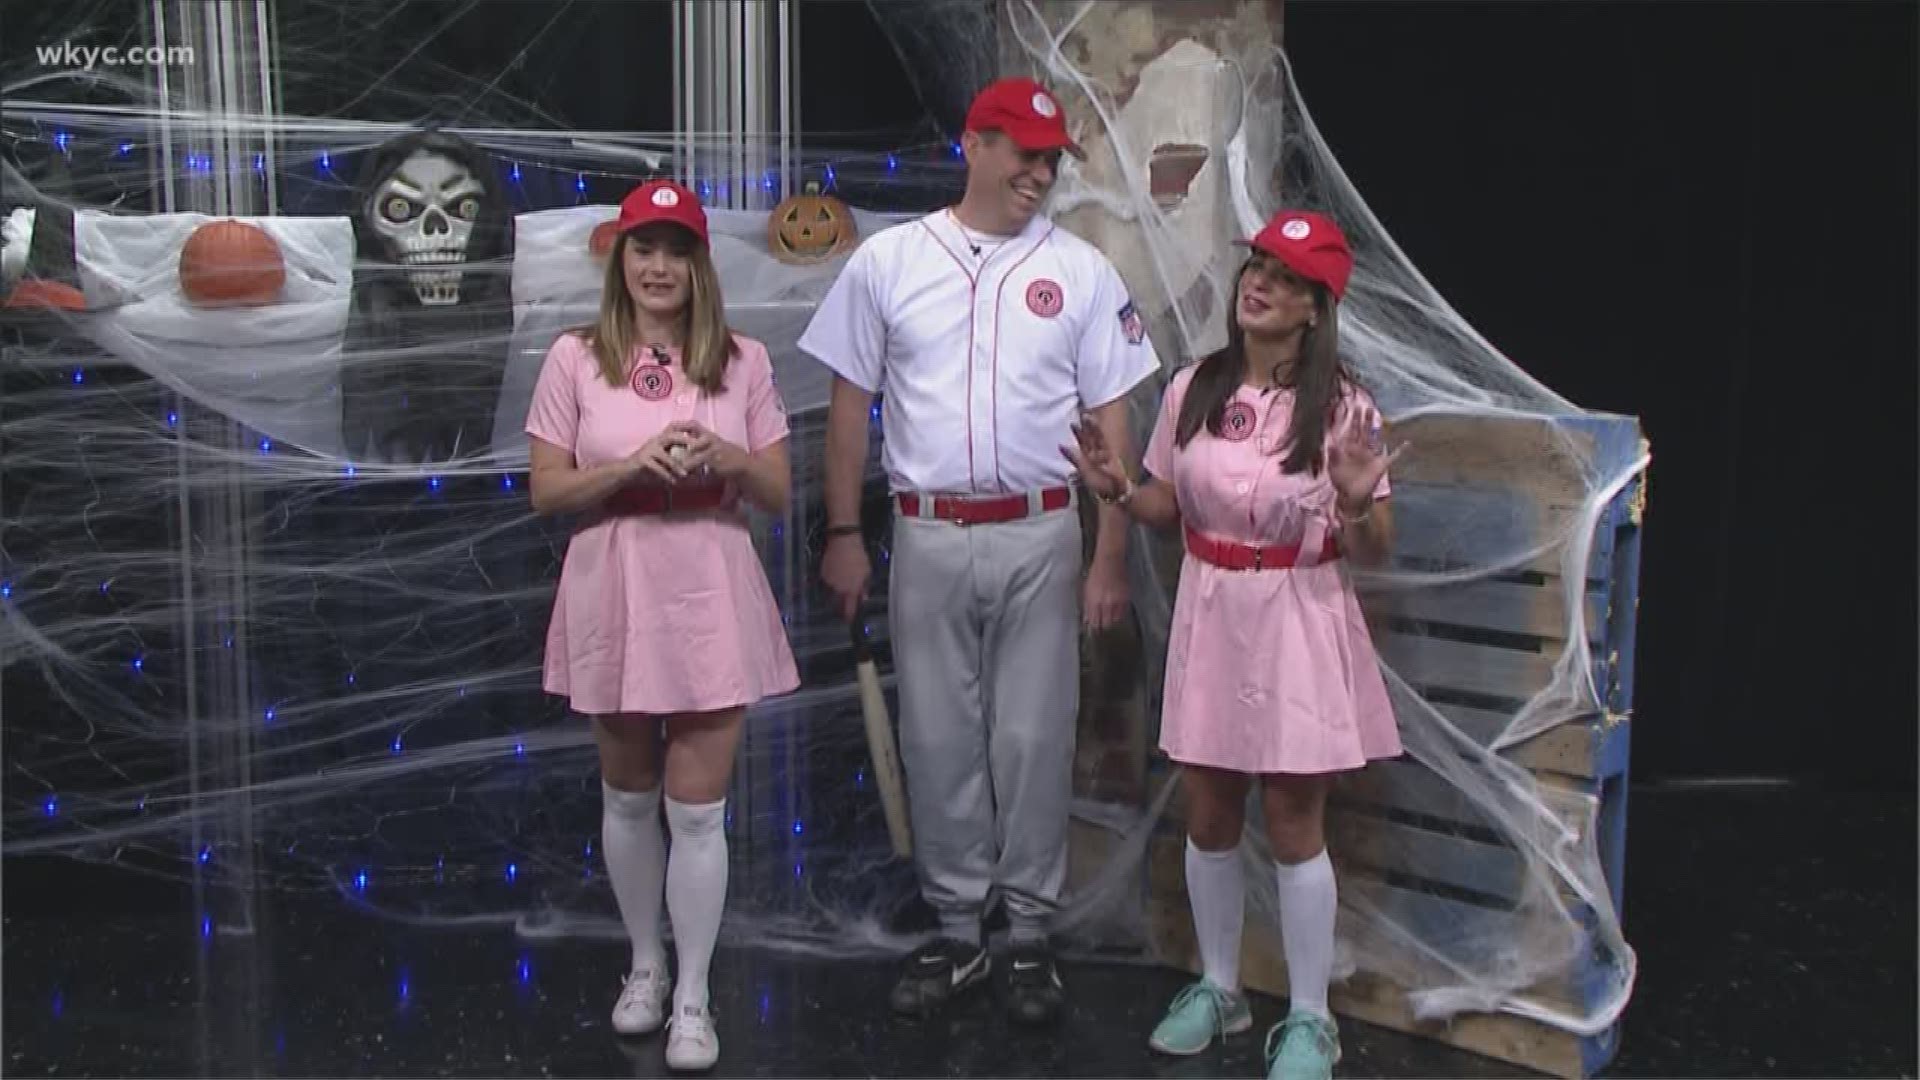 Oct. 31, 2018: We got our Halloween inspiration today from 'A League of Their Own.'